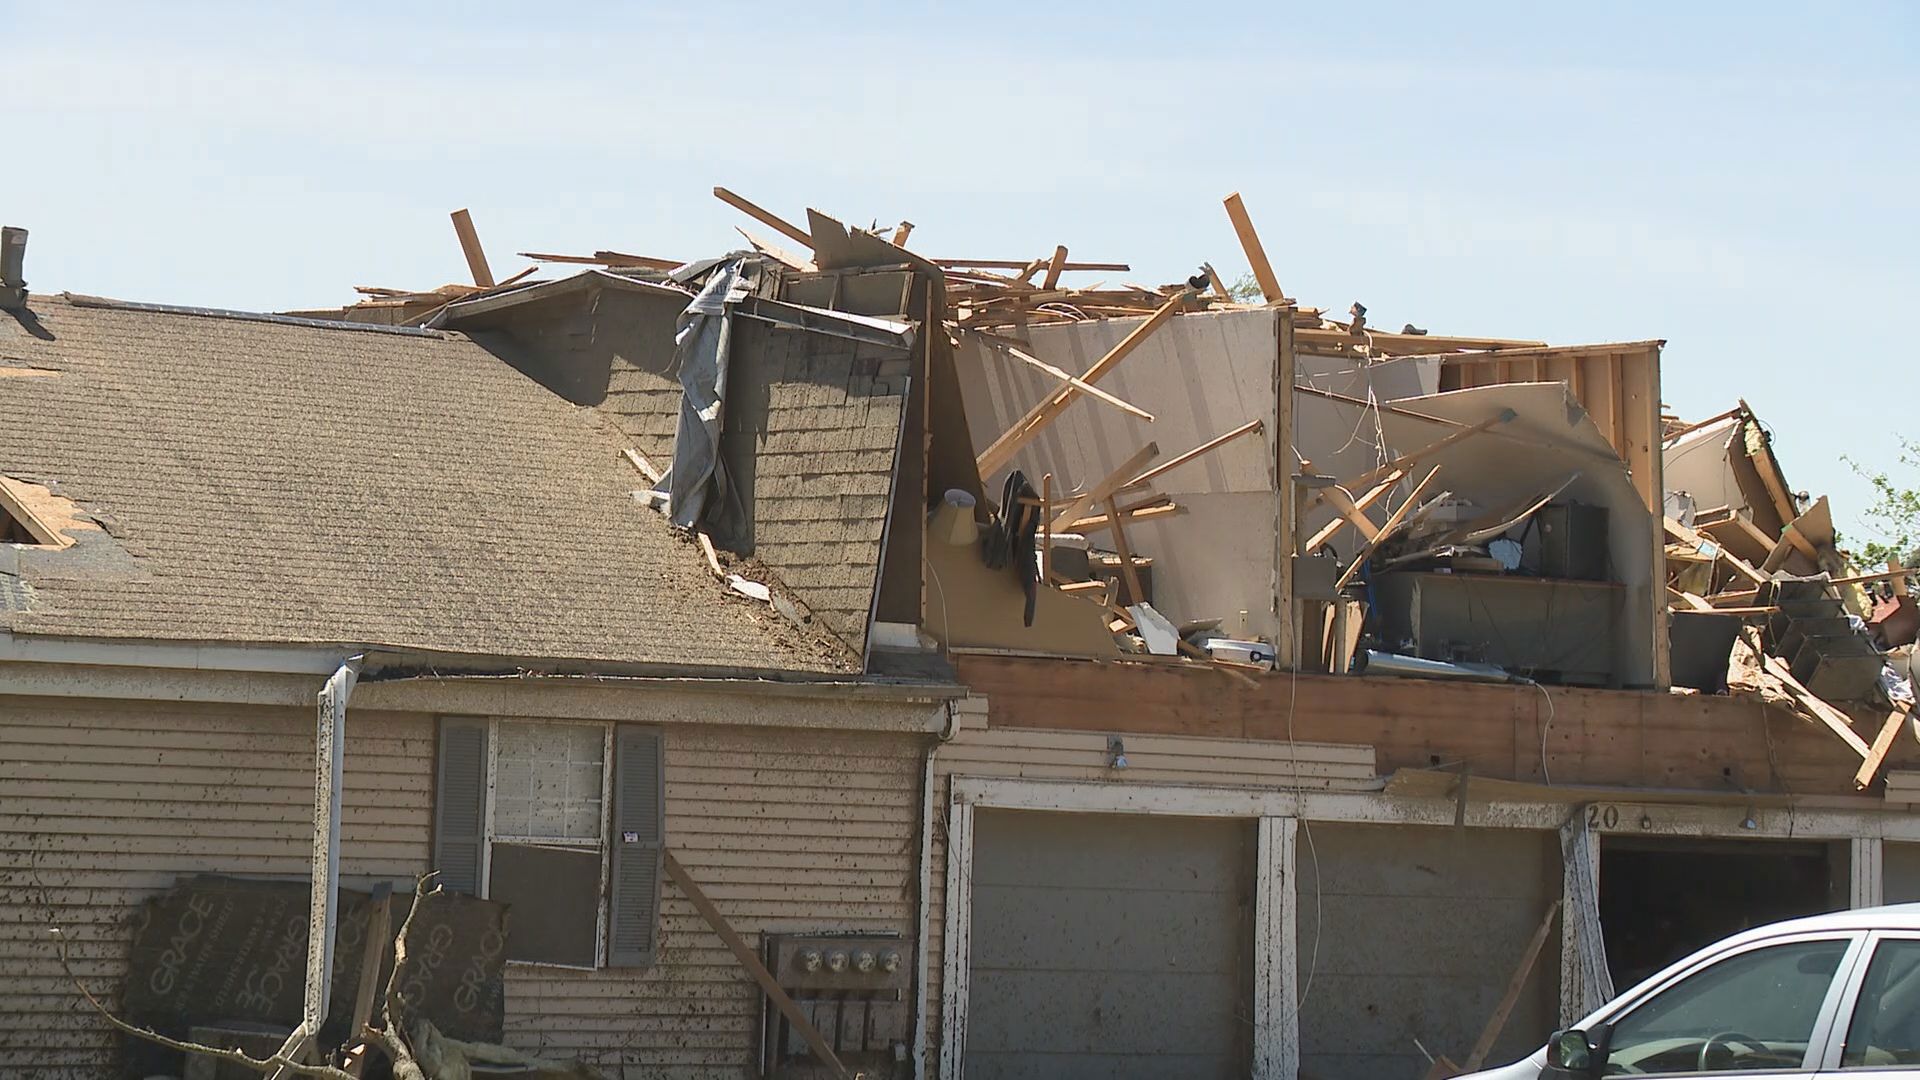 The BBB said scammers called "storm chasers" often target people looking for help cleaning up after severe weather damages their home or property.